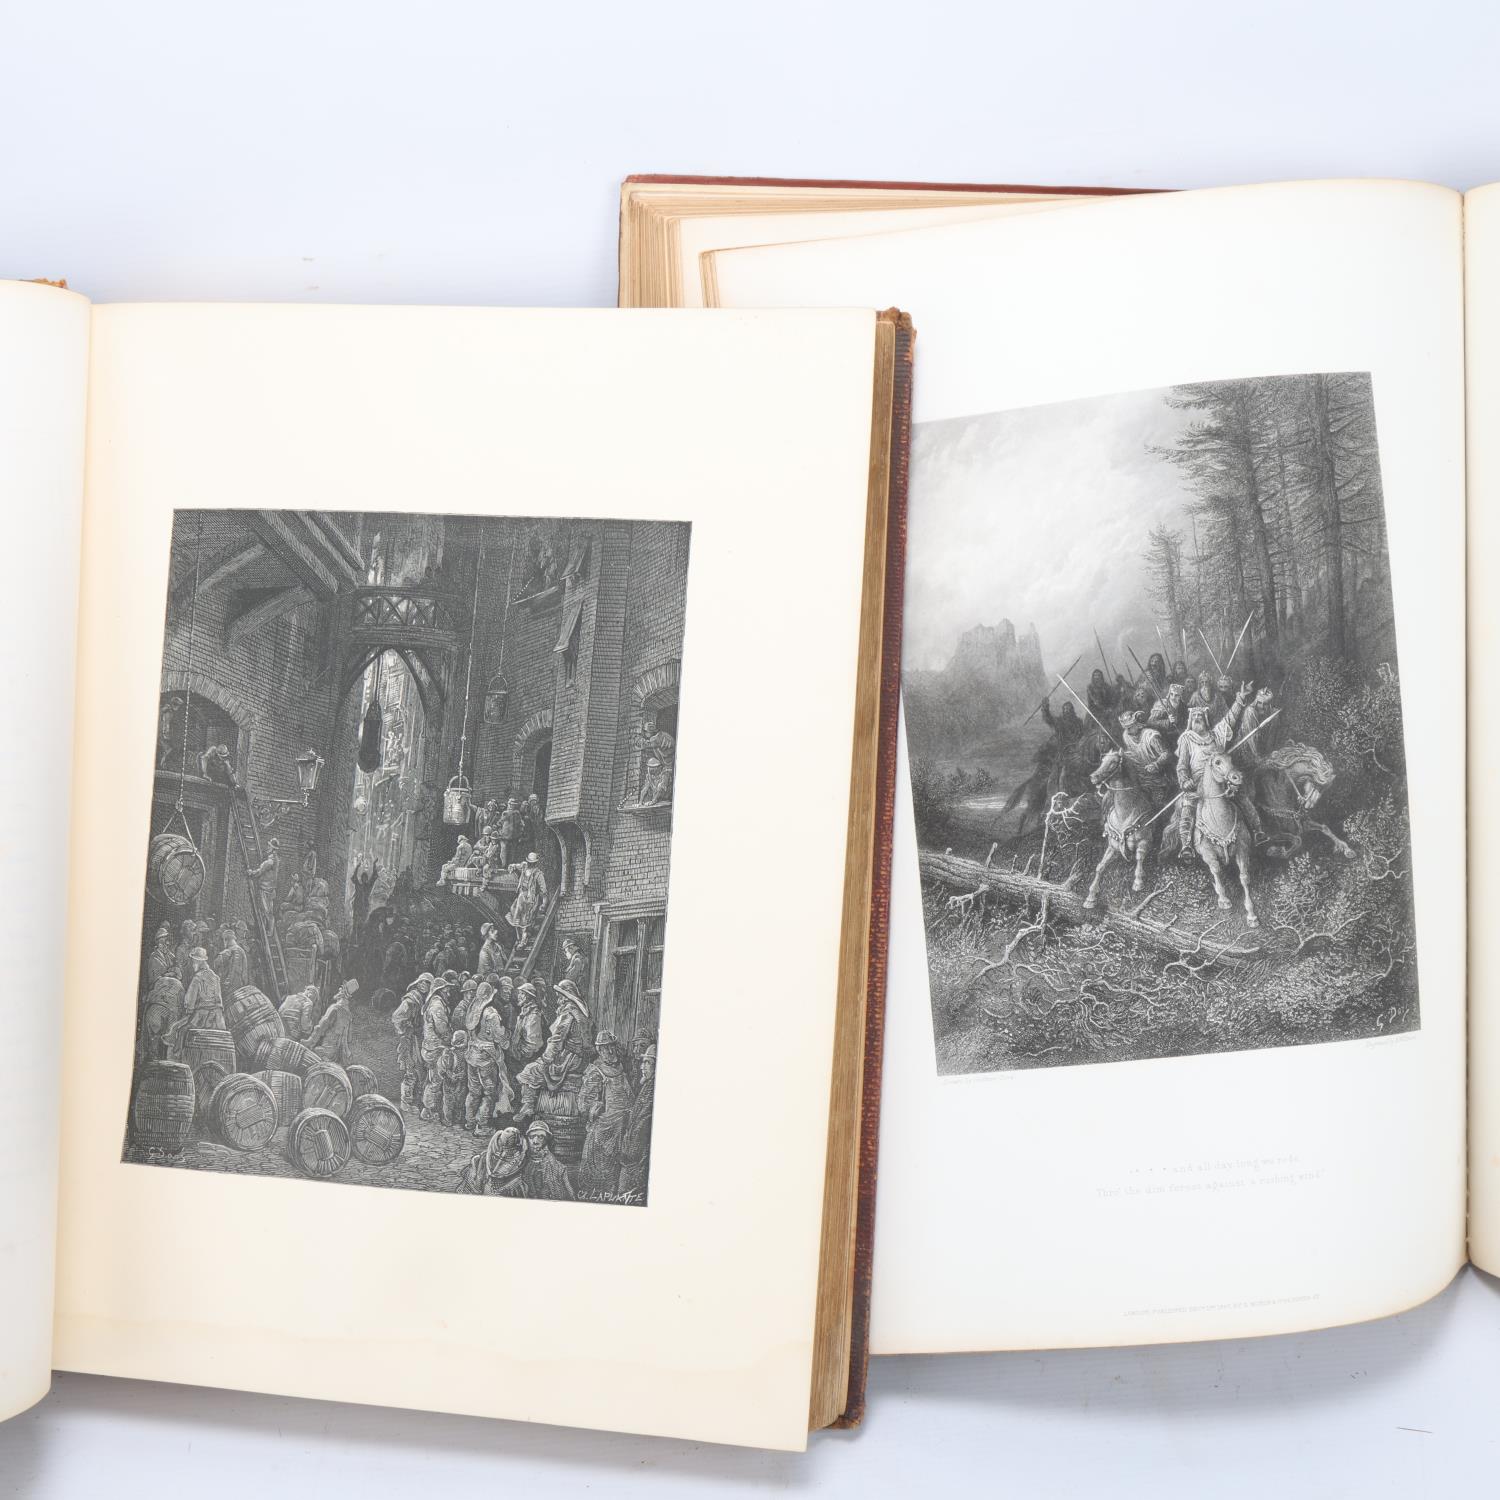 London by Gustave Dore, 1872, leather-bound, and Idylls of the King, by Alfred Tennyson, illustrated - Image 3 of 3